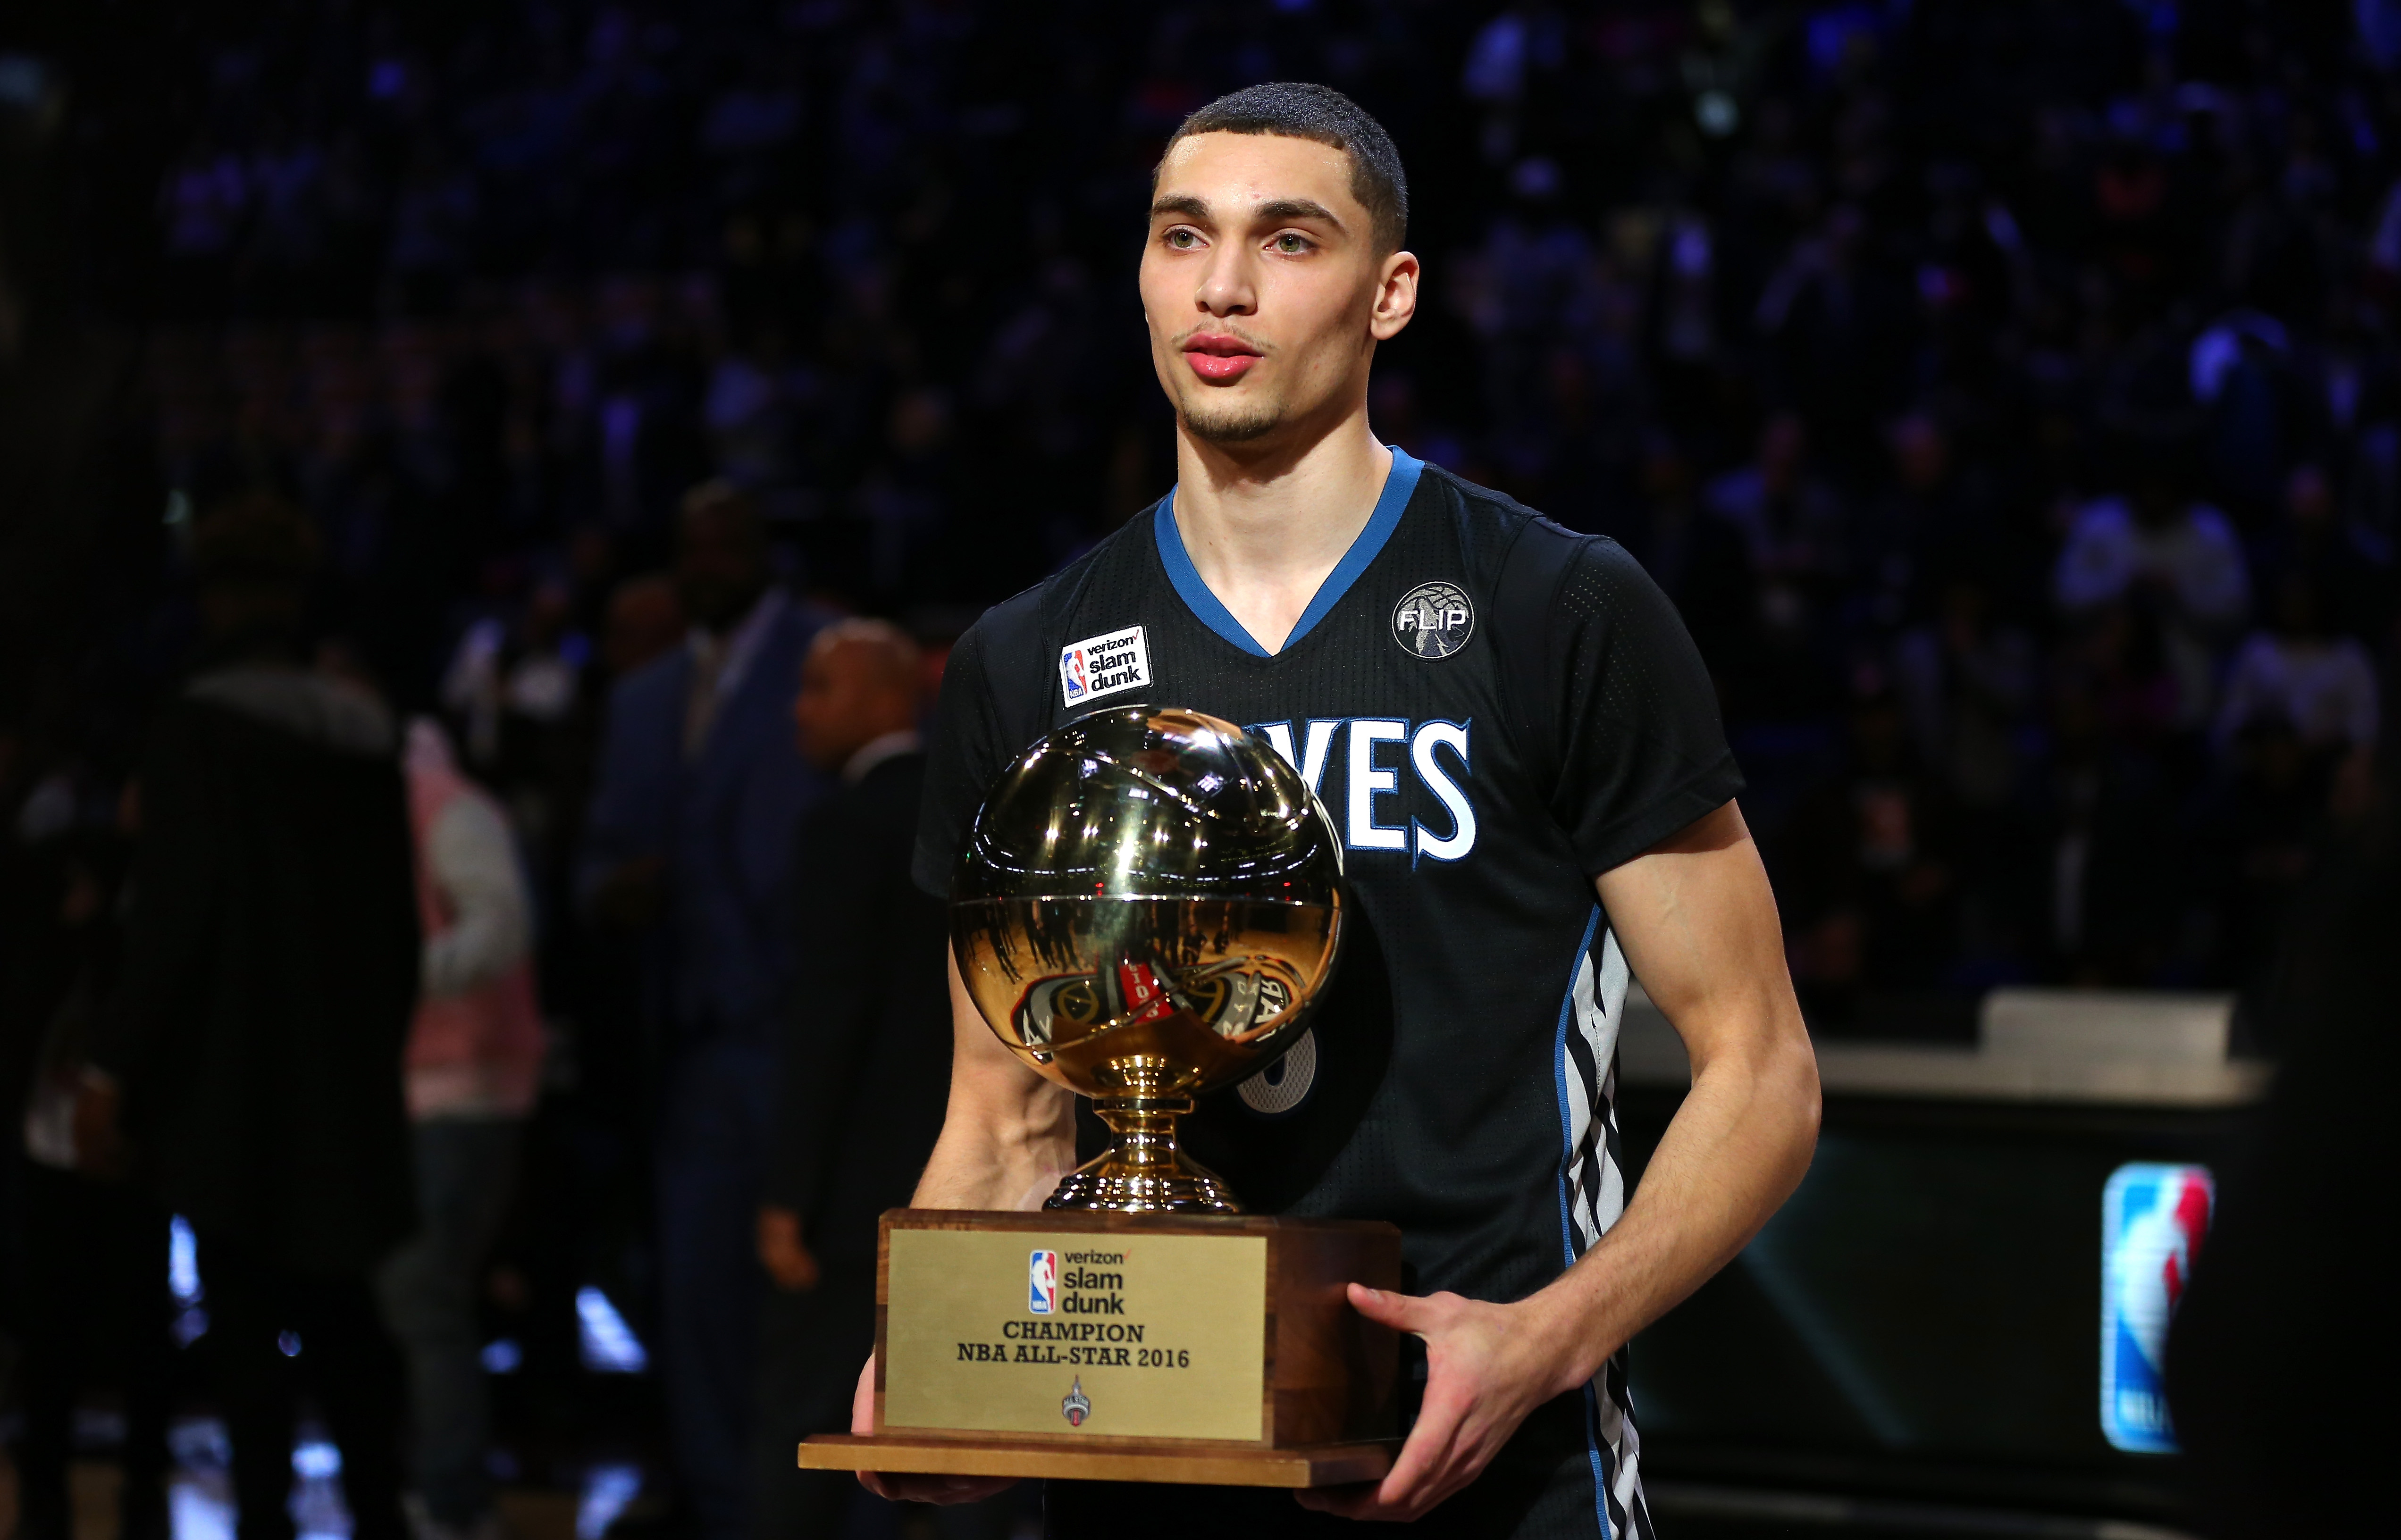 TORONTO, ON - FEBRUARY 13: Zach LaVine of the Minnesota Timberwolves holds the trophy after winning the Verizon Slam Dunk Contest during NBA All-Star Weekend 2016 at Air Canada Centre on February 13, 2016 in Toronto, Canada. NOTE TO USER: User expressly acknowledges and agrees that, by downloading and/or using this Photograph, user is consenting to the terms and conditions of the Getty Images License Agreement.   Elsa/Getty Images/AFP